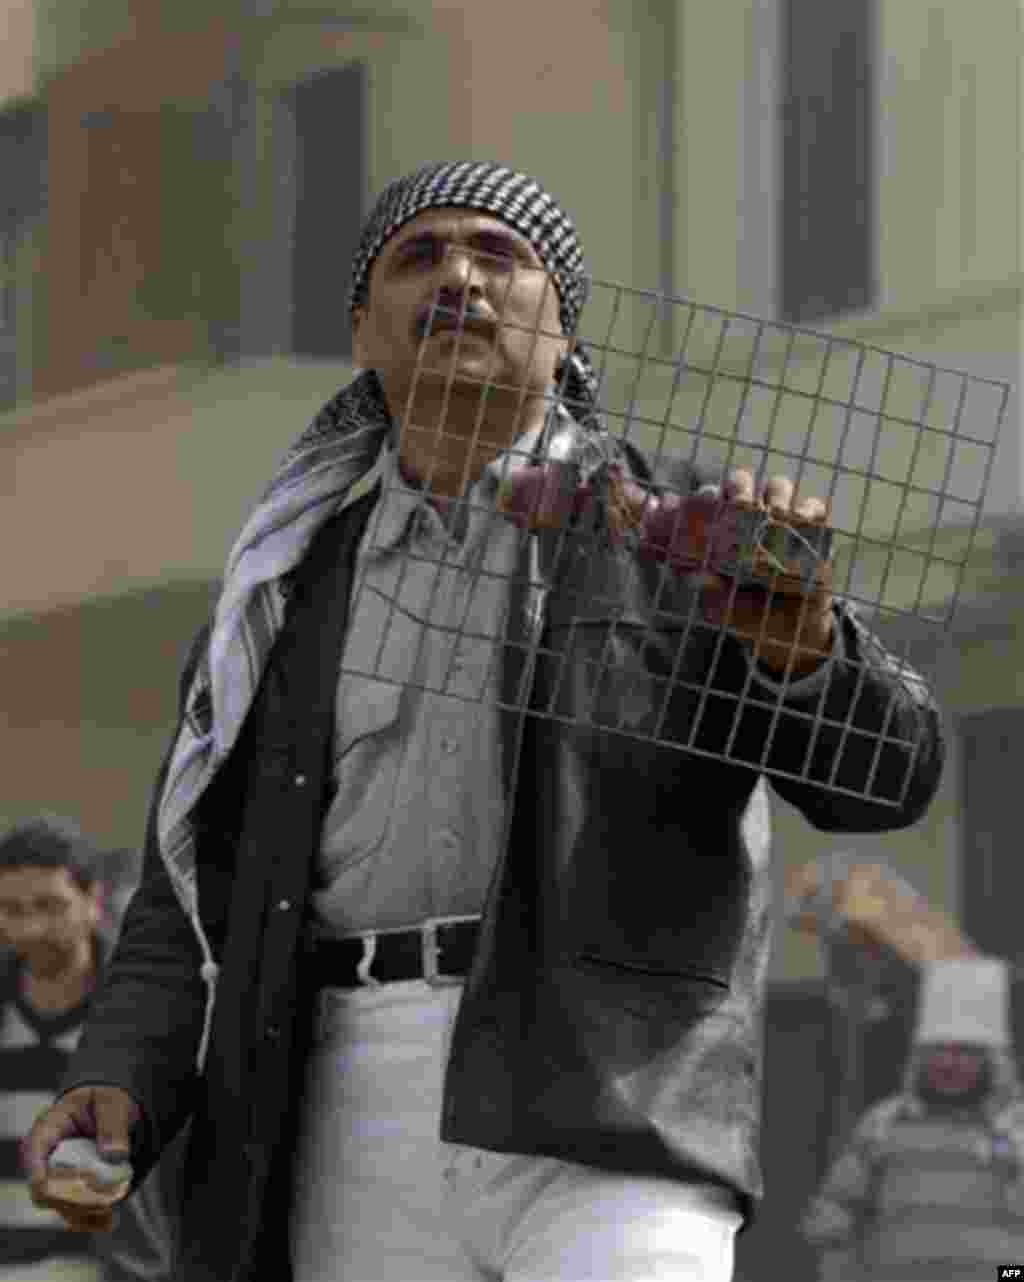 An anti government protestor holds stones and a grille shield during clashes in Cairo, Egypt, Thursday, Feb. 3, 2011. Another bout of heavy gunfire and clashes erupted Thursday around dusk in the Cairo square at the center of Egypt's anti-government chaos